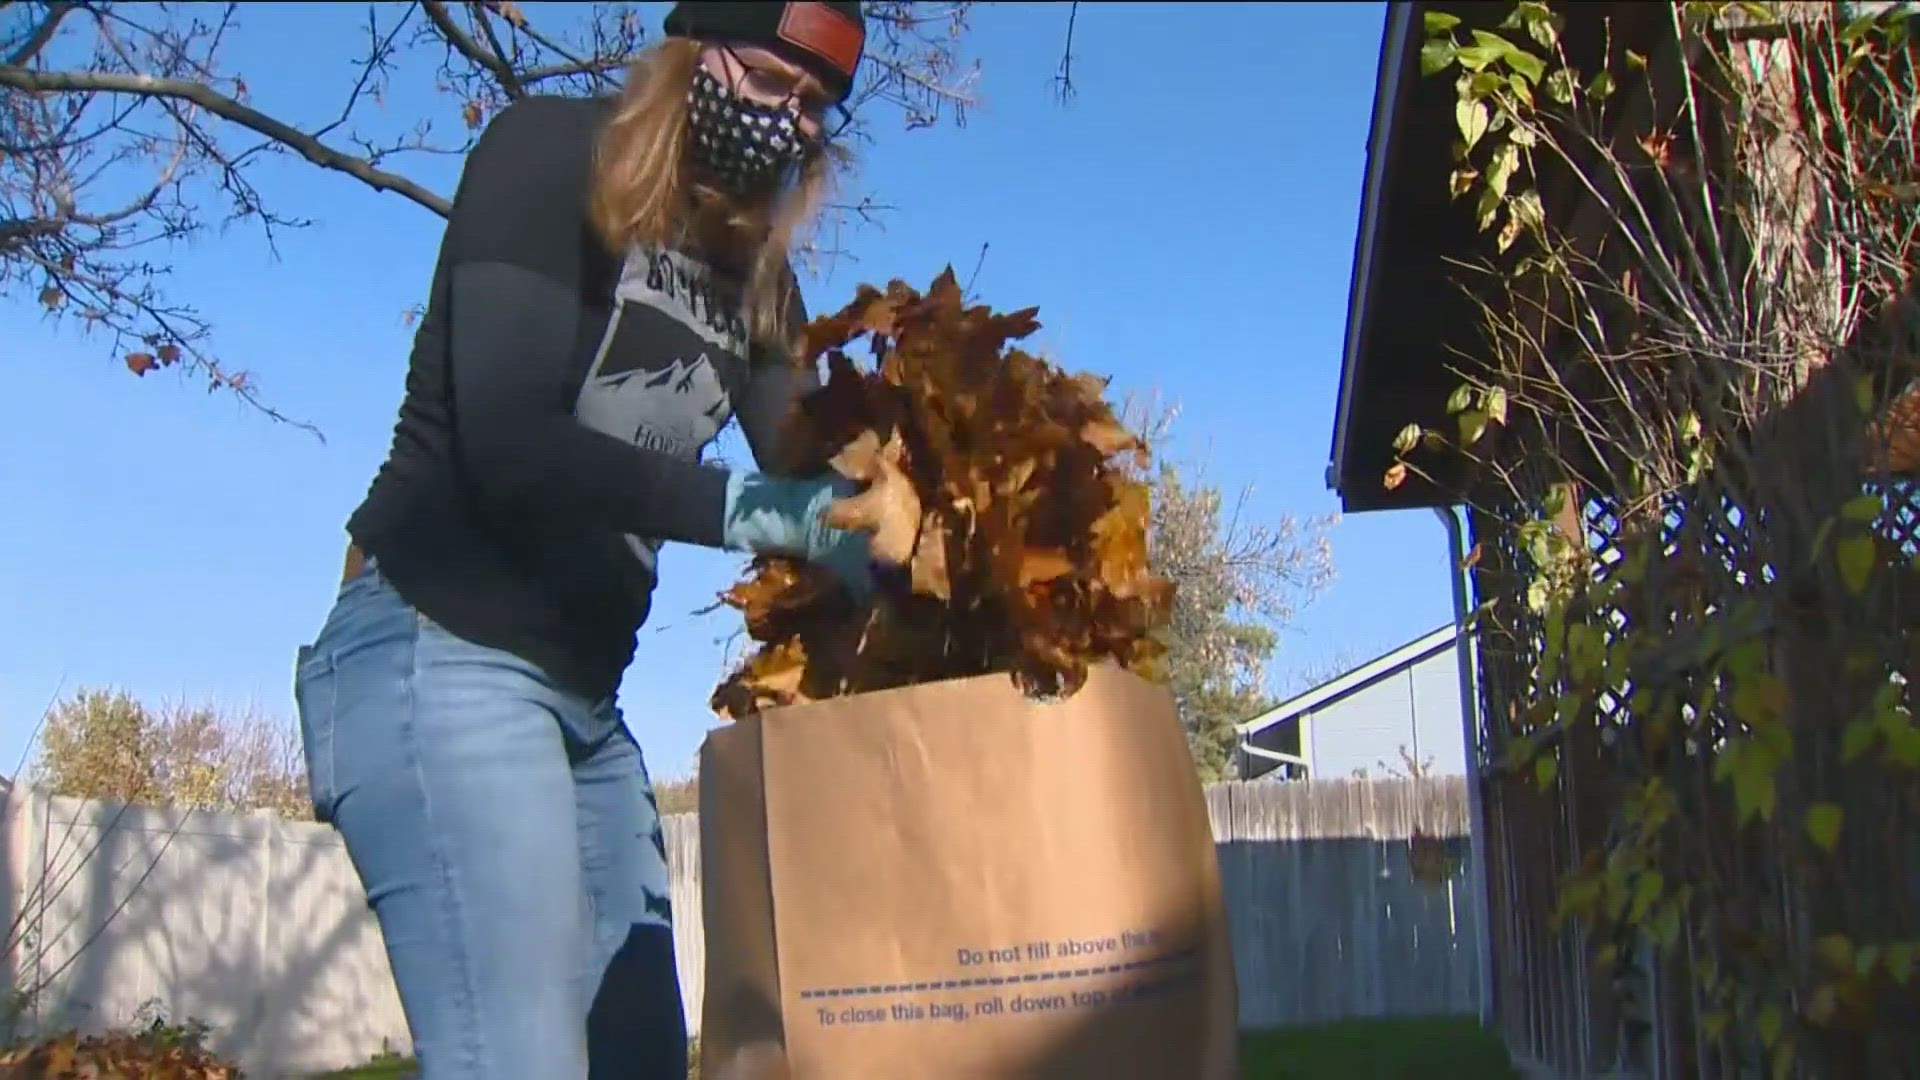 The annual event helps clean leaves from senior citizens' and disabled residents' yards.